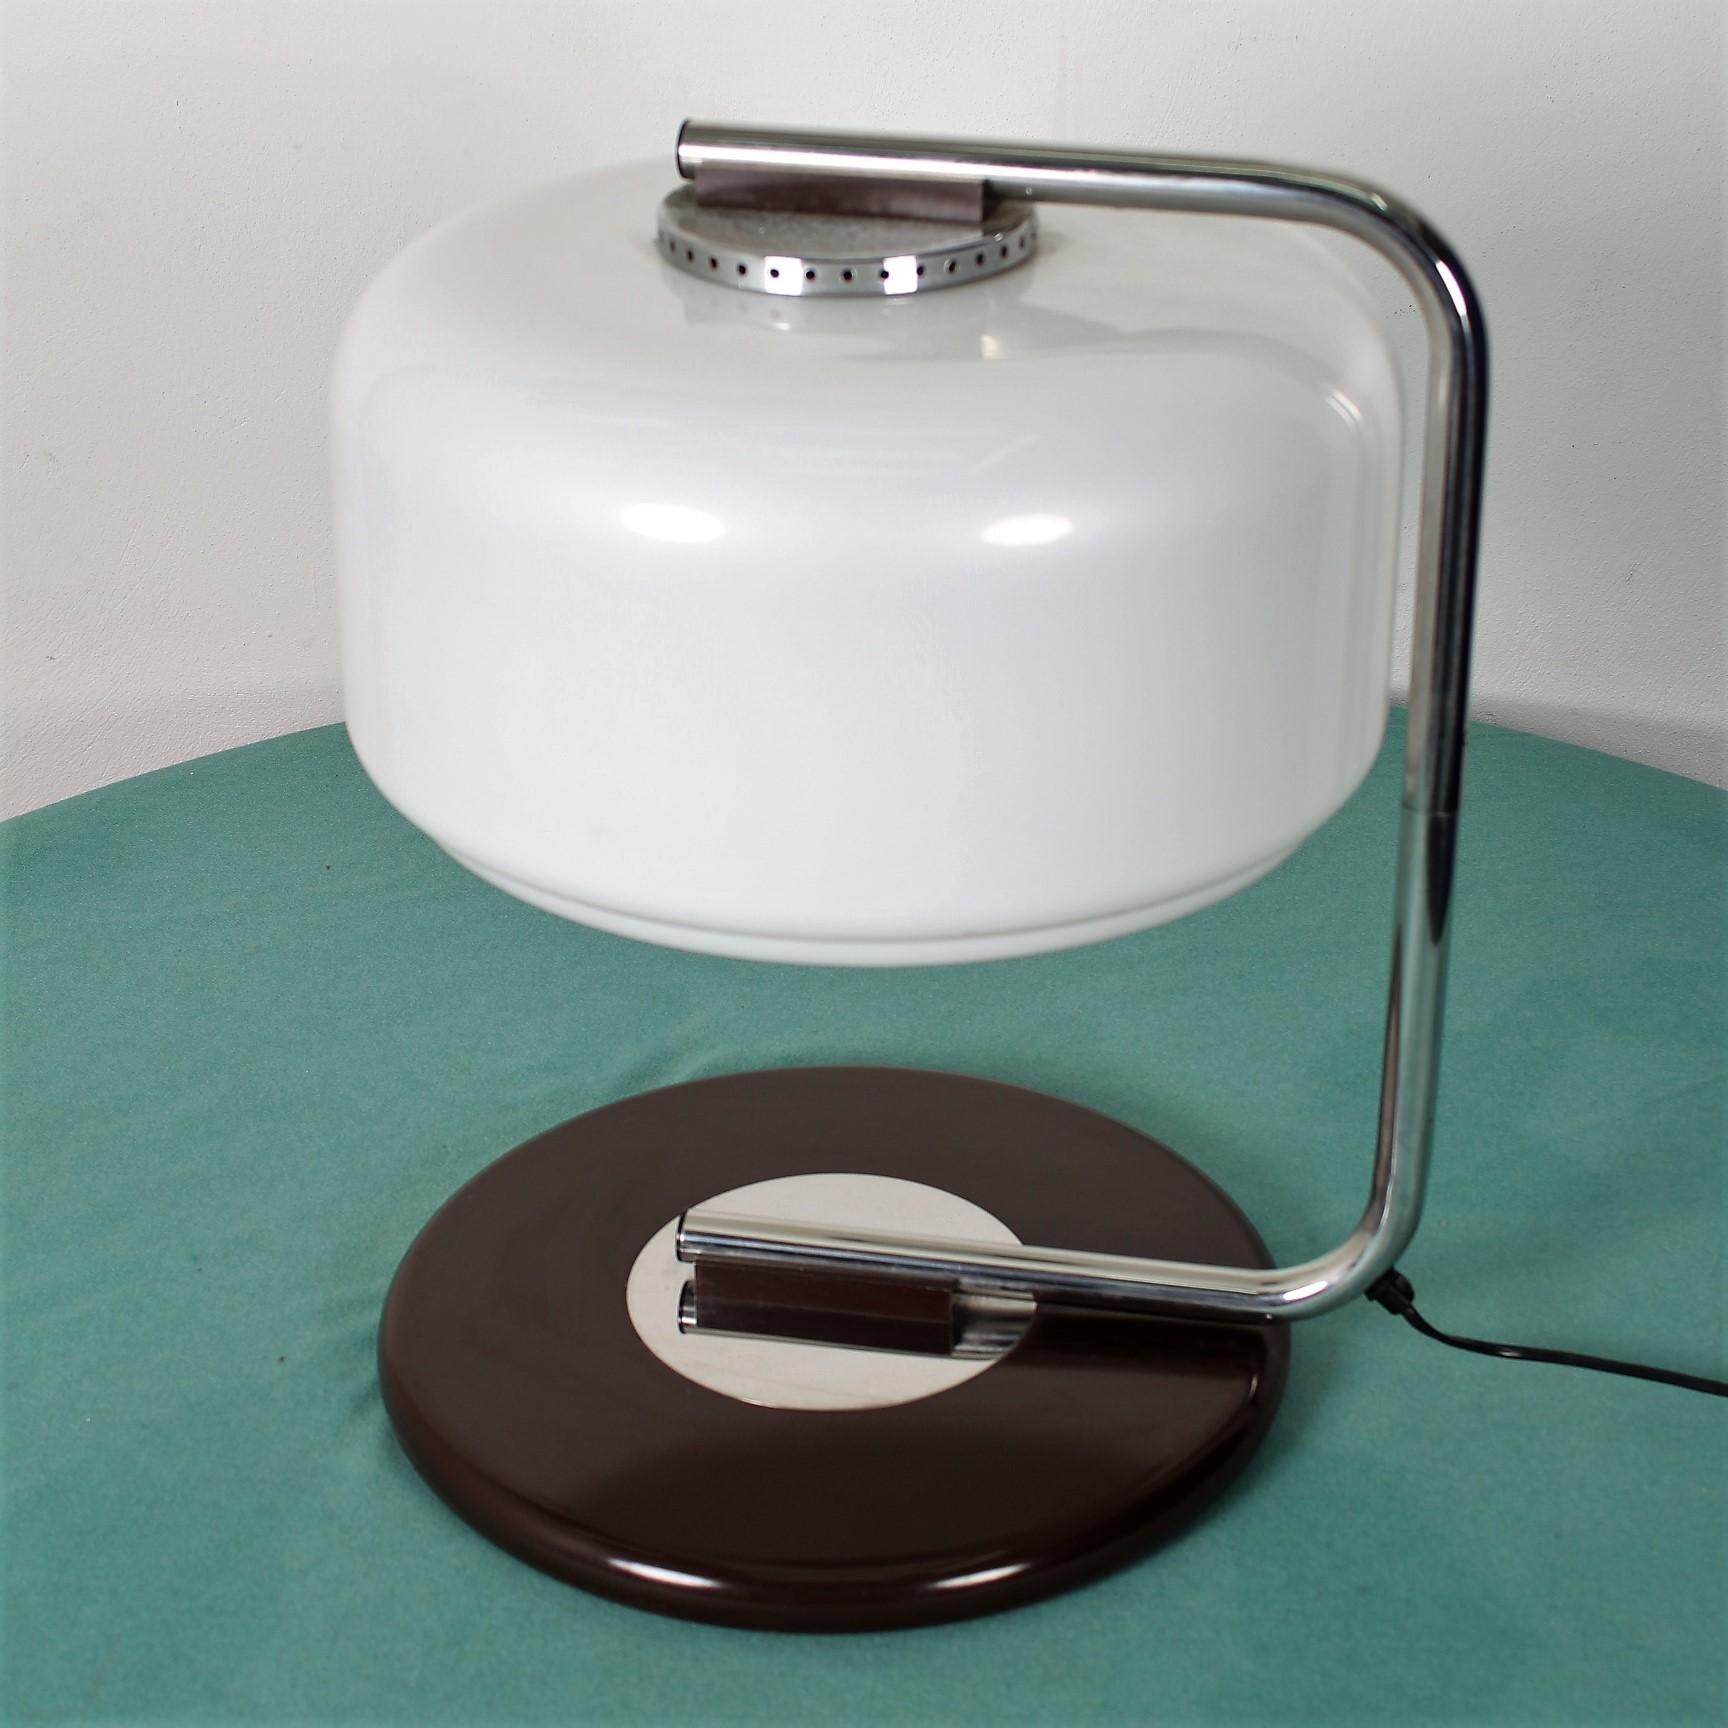 Very elegant table lamp with swivel arm in chromed metal, white glass lampshade and metal base.
Italian production by Zonca, Voghera, 1970s. Adhesive brand on the bottom.
Wear consistent with age and use.
  